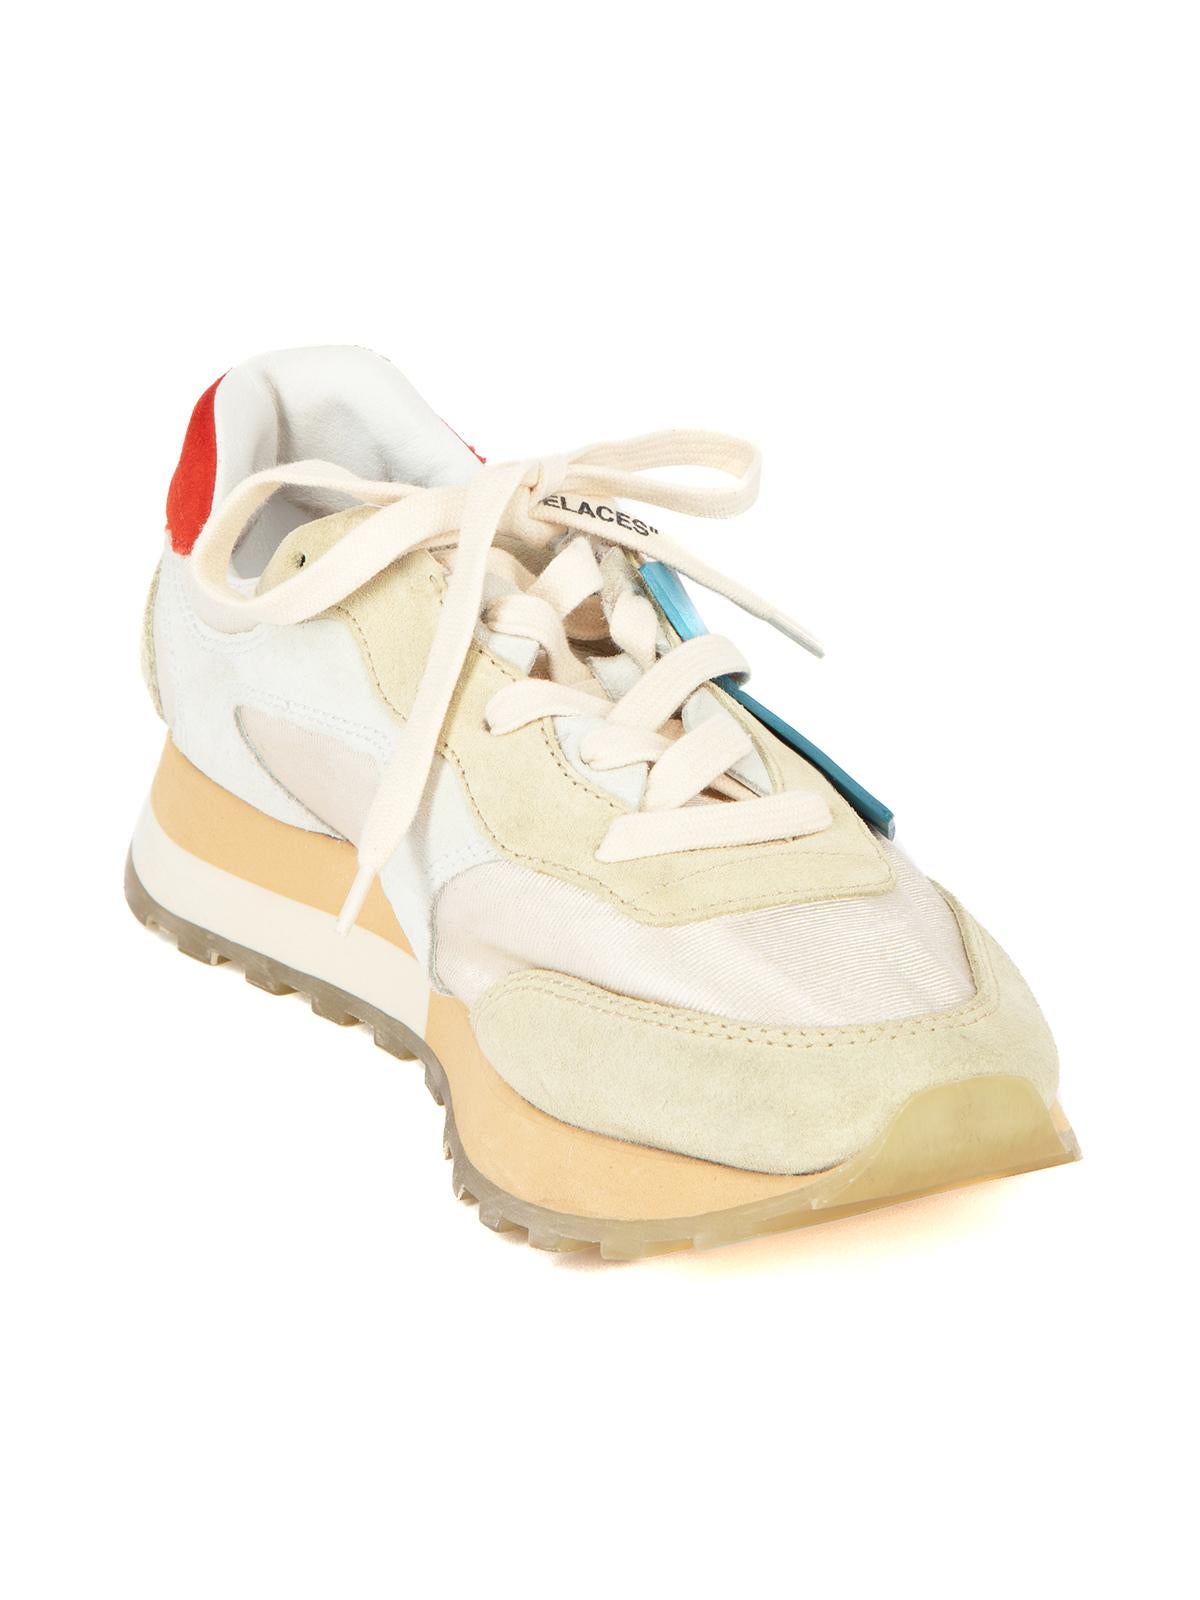 CONDITION is Very good. Minimal wear to sneakers is evident. Minimal wear to suede material around toe front and there are some scuffs seen around the midsole on this used Off-White designer resale item. Details HG Runner Multicolour Multi fabric